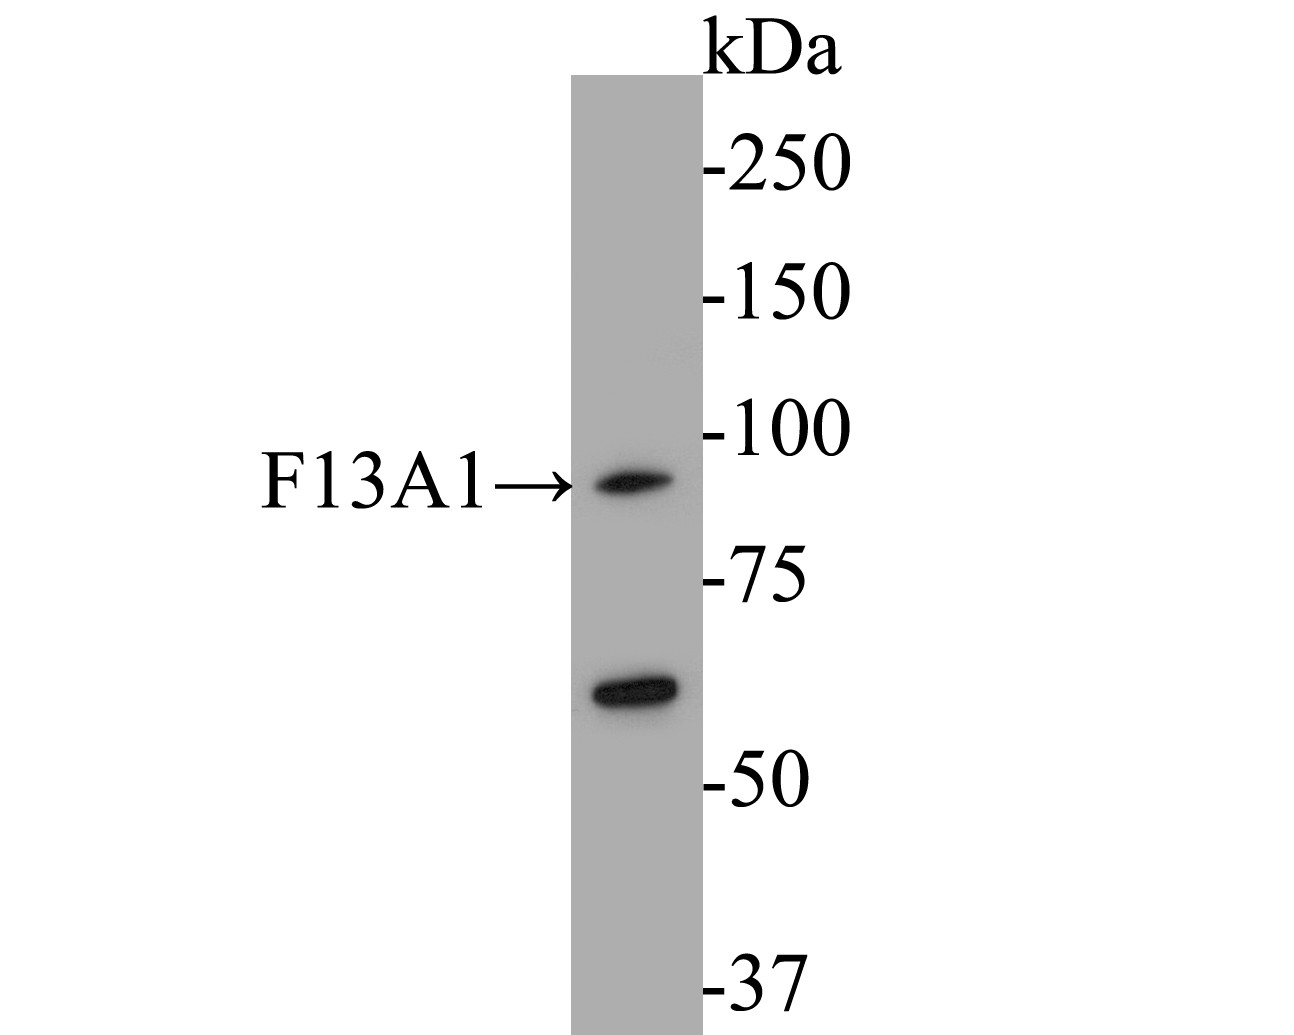 Western blot analysis of F13A1 on human placenta tissue  lysates. Proteins were transferred to a PVDF membrane and blocked with 5% BSA in PBS for 1 hour at room temperature. The primary antibody (EM1901-39, 1/500) was used in 5% BSA at room temperature for 2 hours. Goat Anti-Mouse IgG - HRP Secondary Antibody (HA1006) at 1:5,000 dilution was used for 1 hour at room temperature.